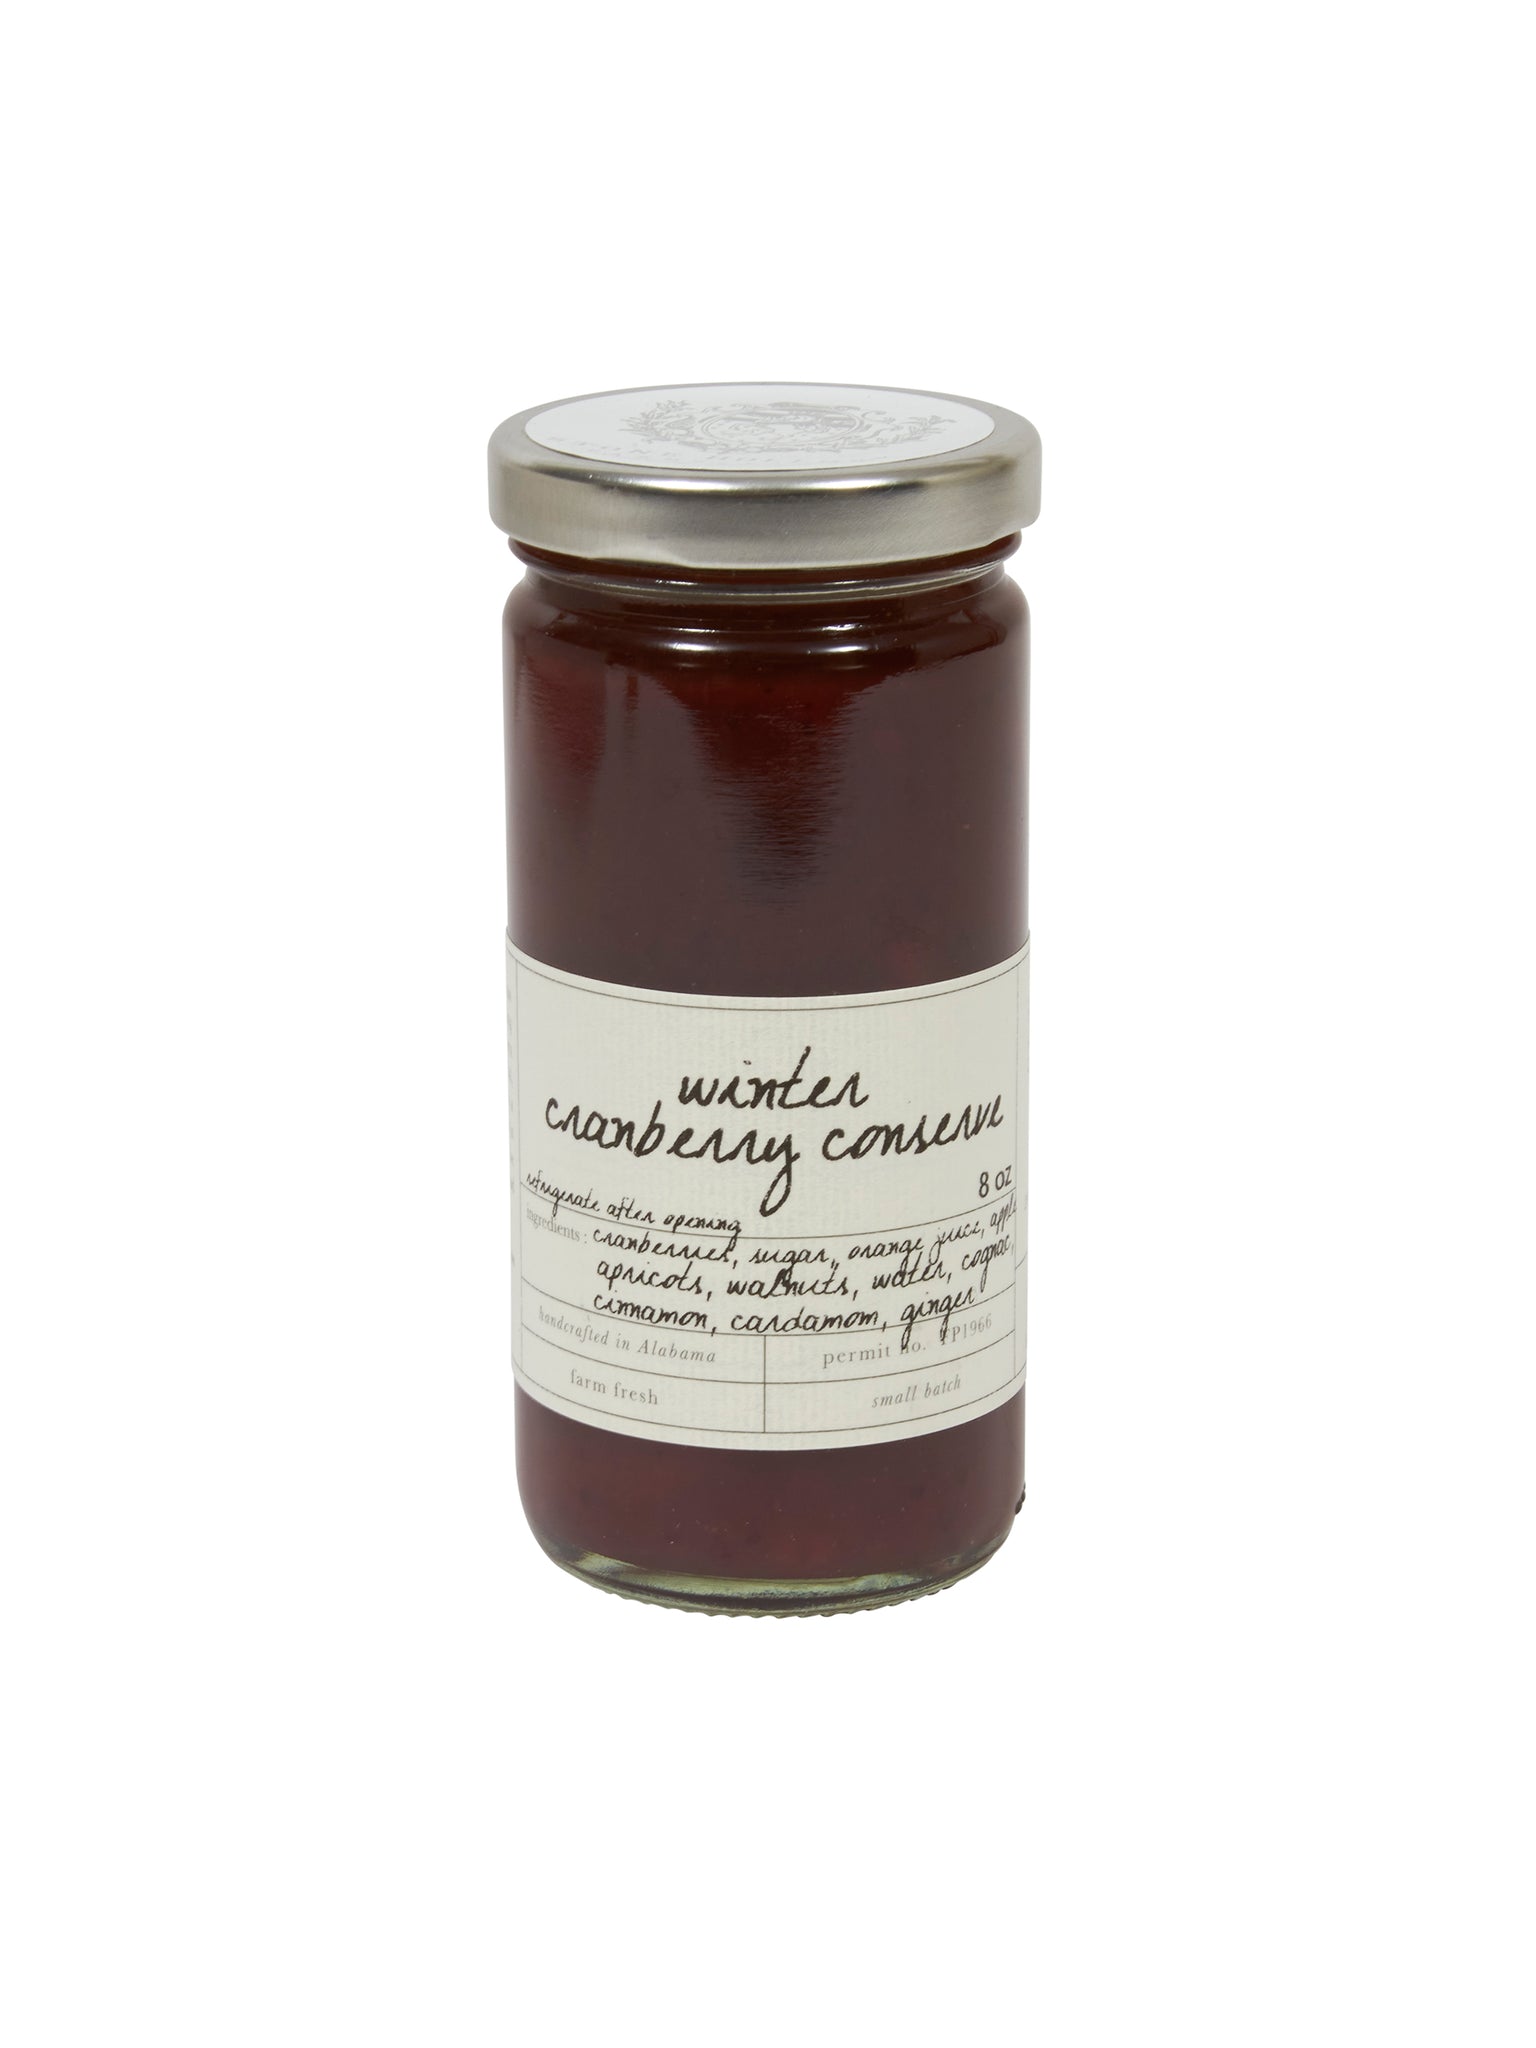 Stone Hollow Farmstead Winter Cranberry Conserve Weston Table